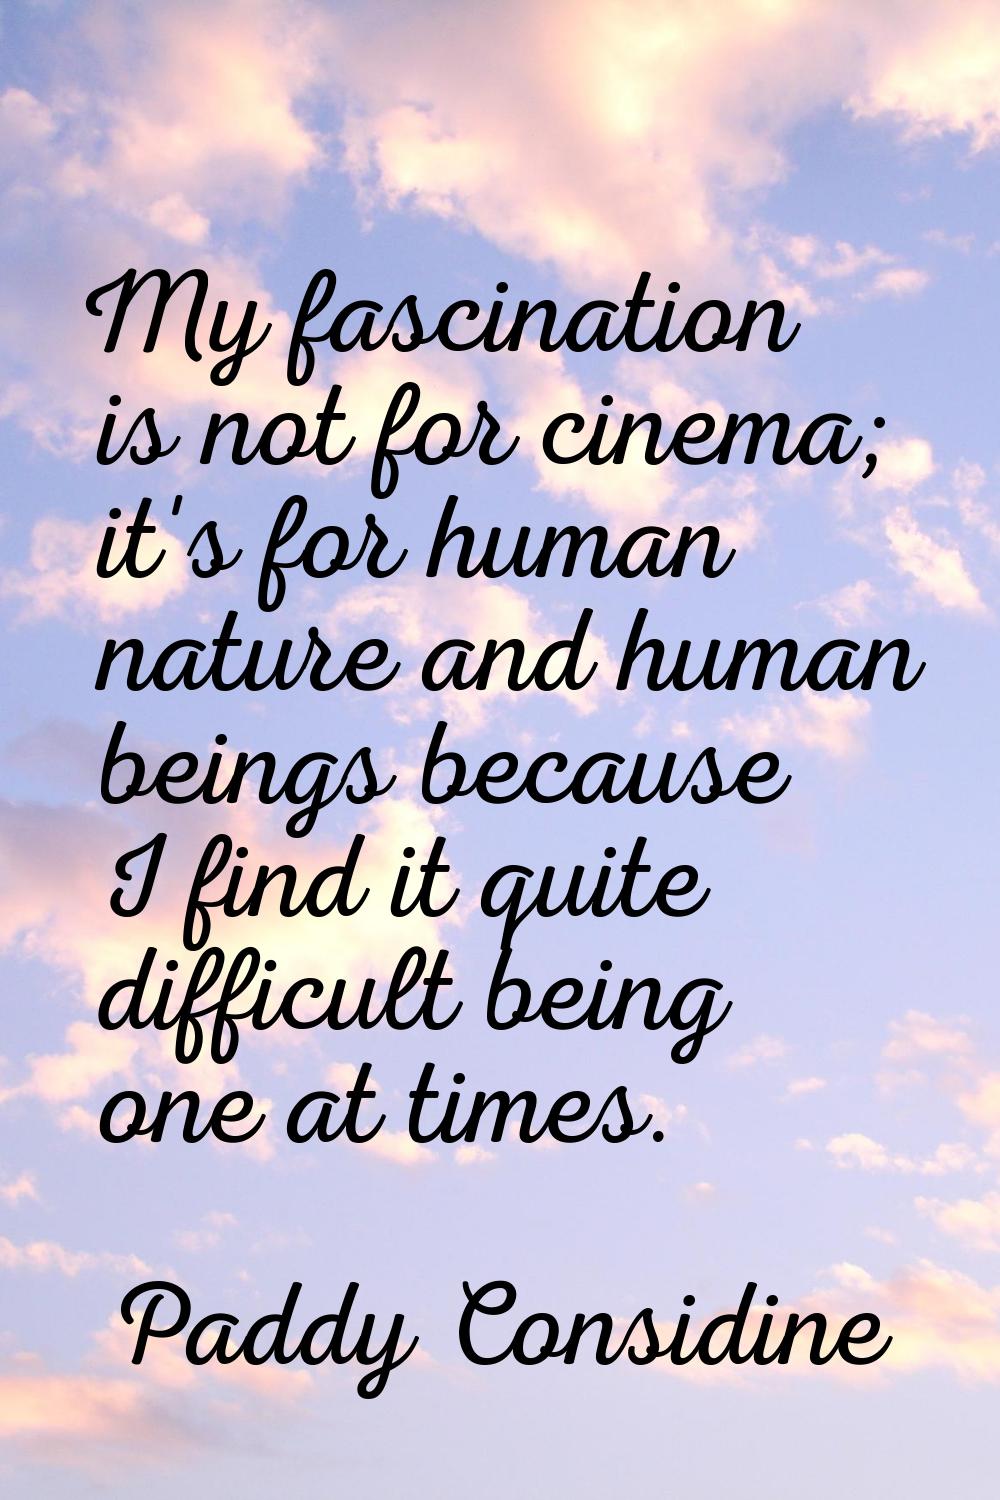 My fascination is not for cinema; it's for human nature and human beings because I find it quite di